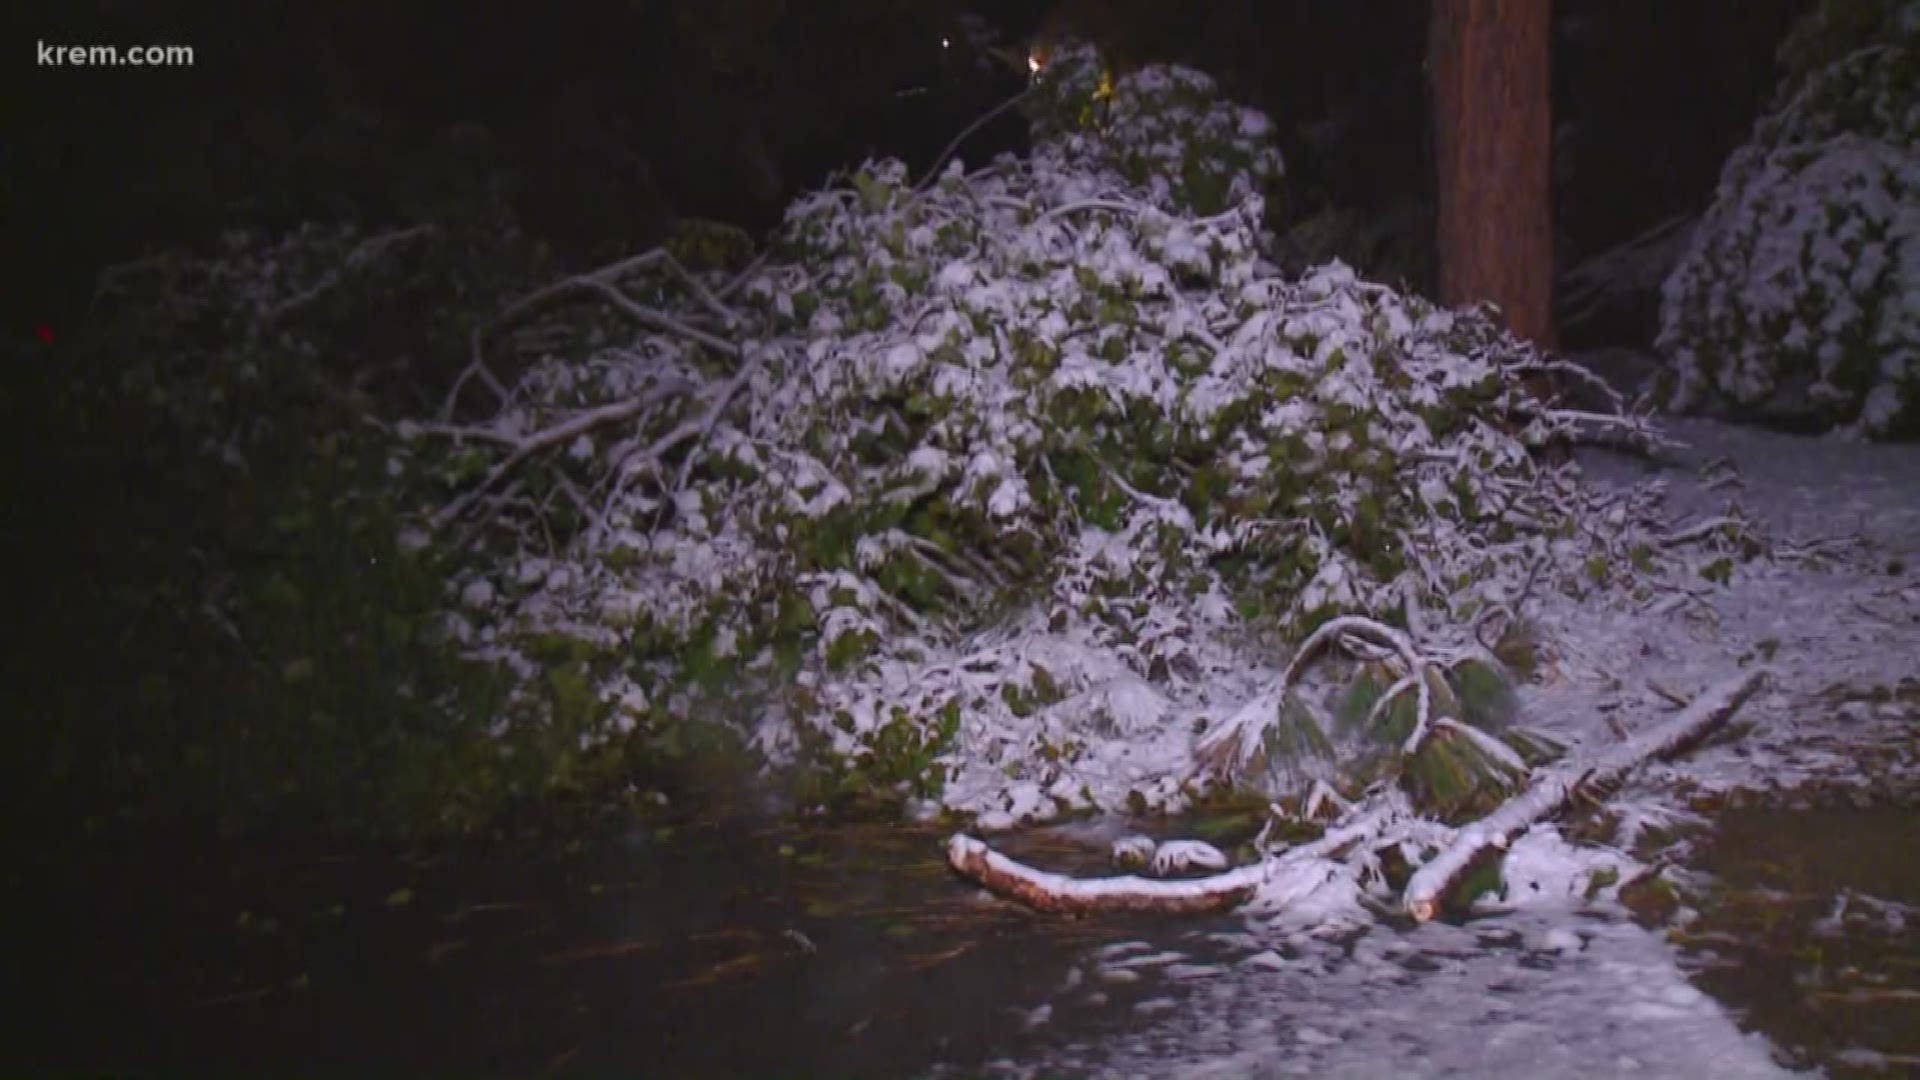 We are tracking record-breaking snowfall, downed trees and power outages on Oct. 9 after an overnight storm.